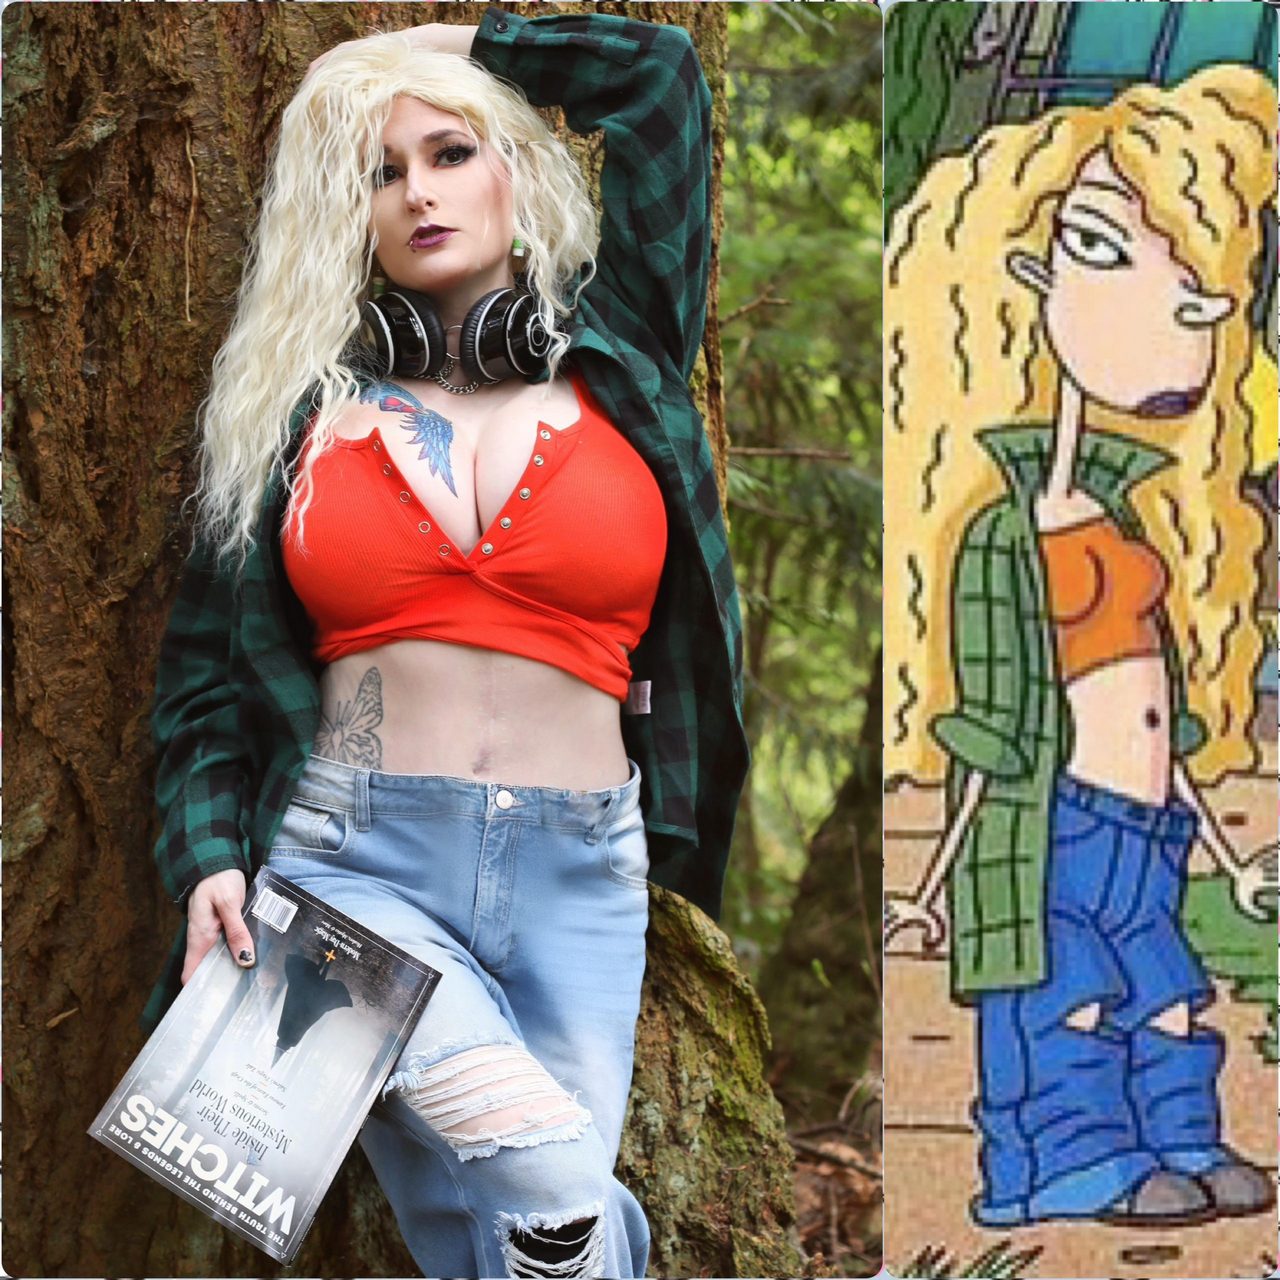 Debbie Thornberry From The Wild Thornberrys Cosplay By Captive Cospla